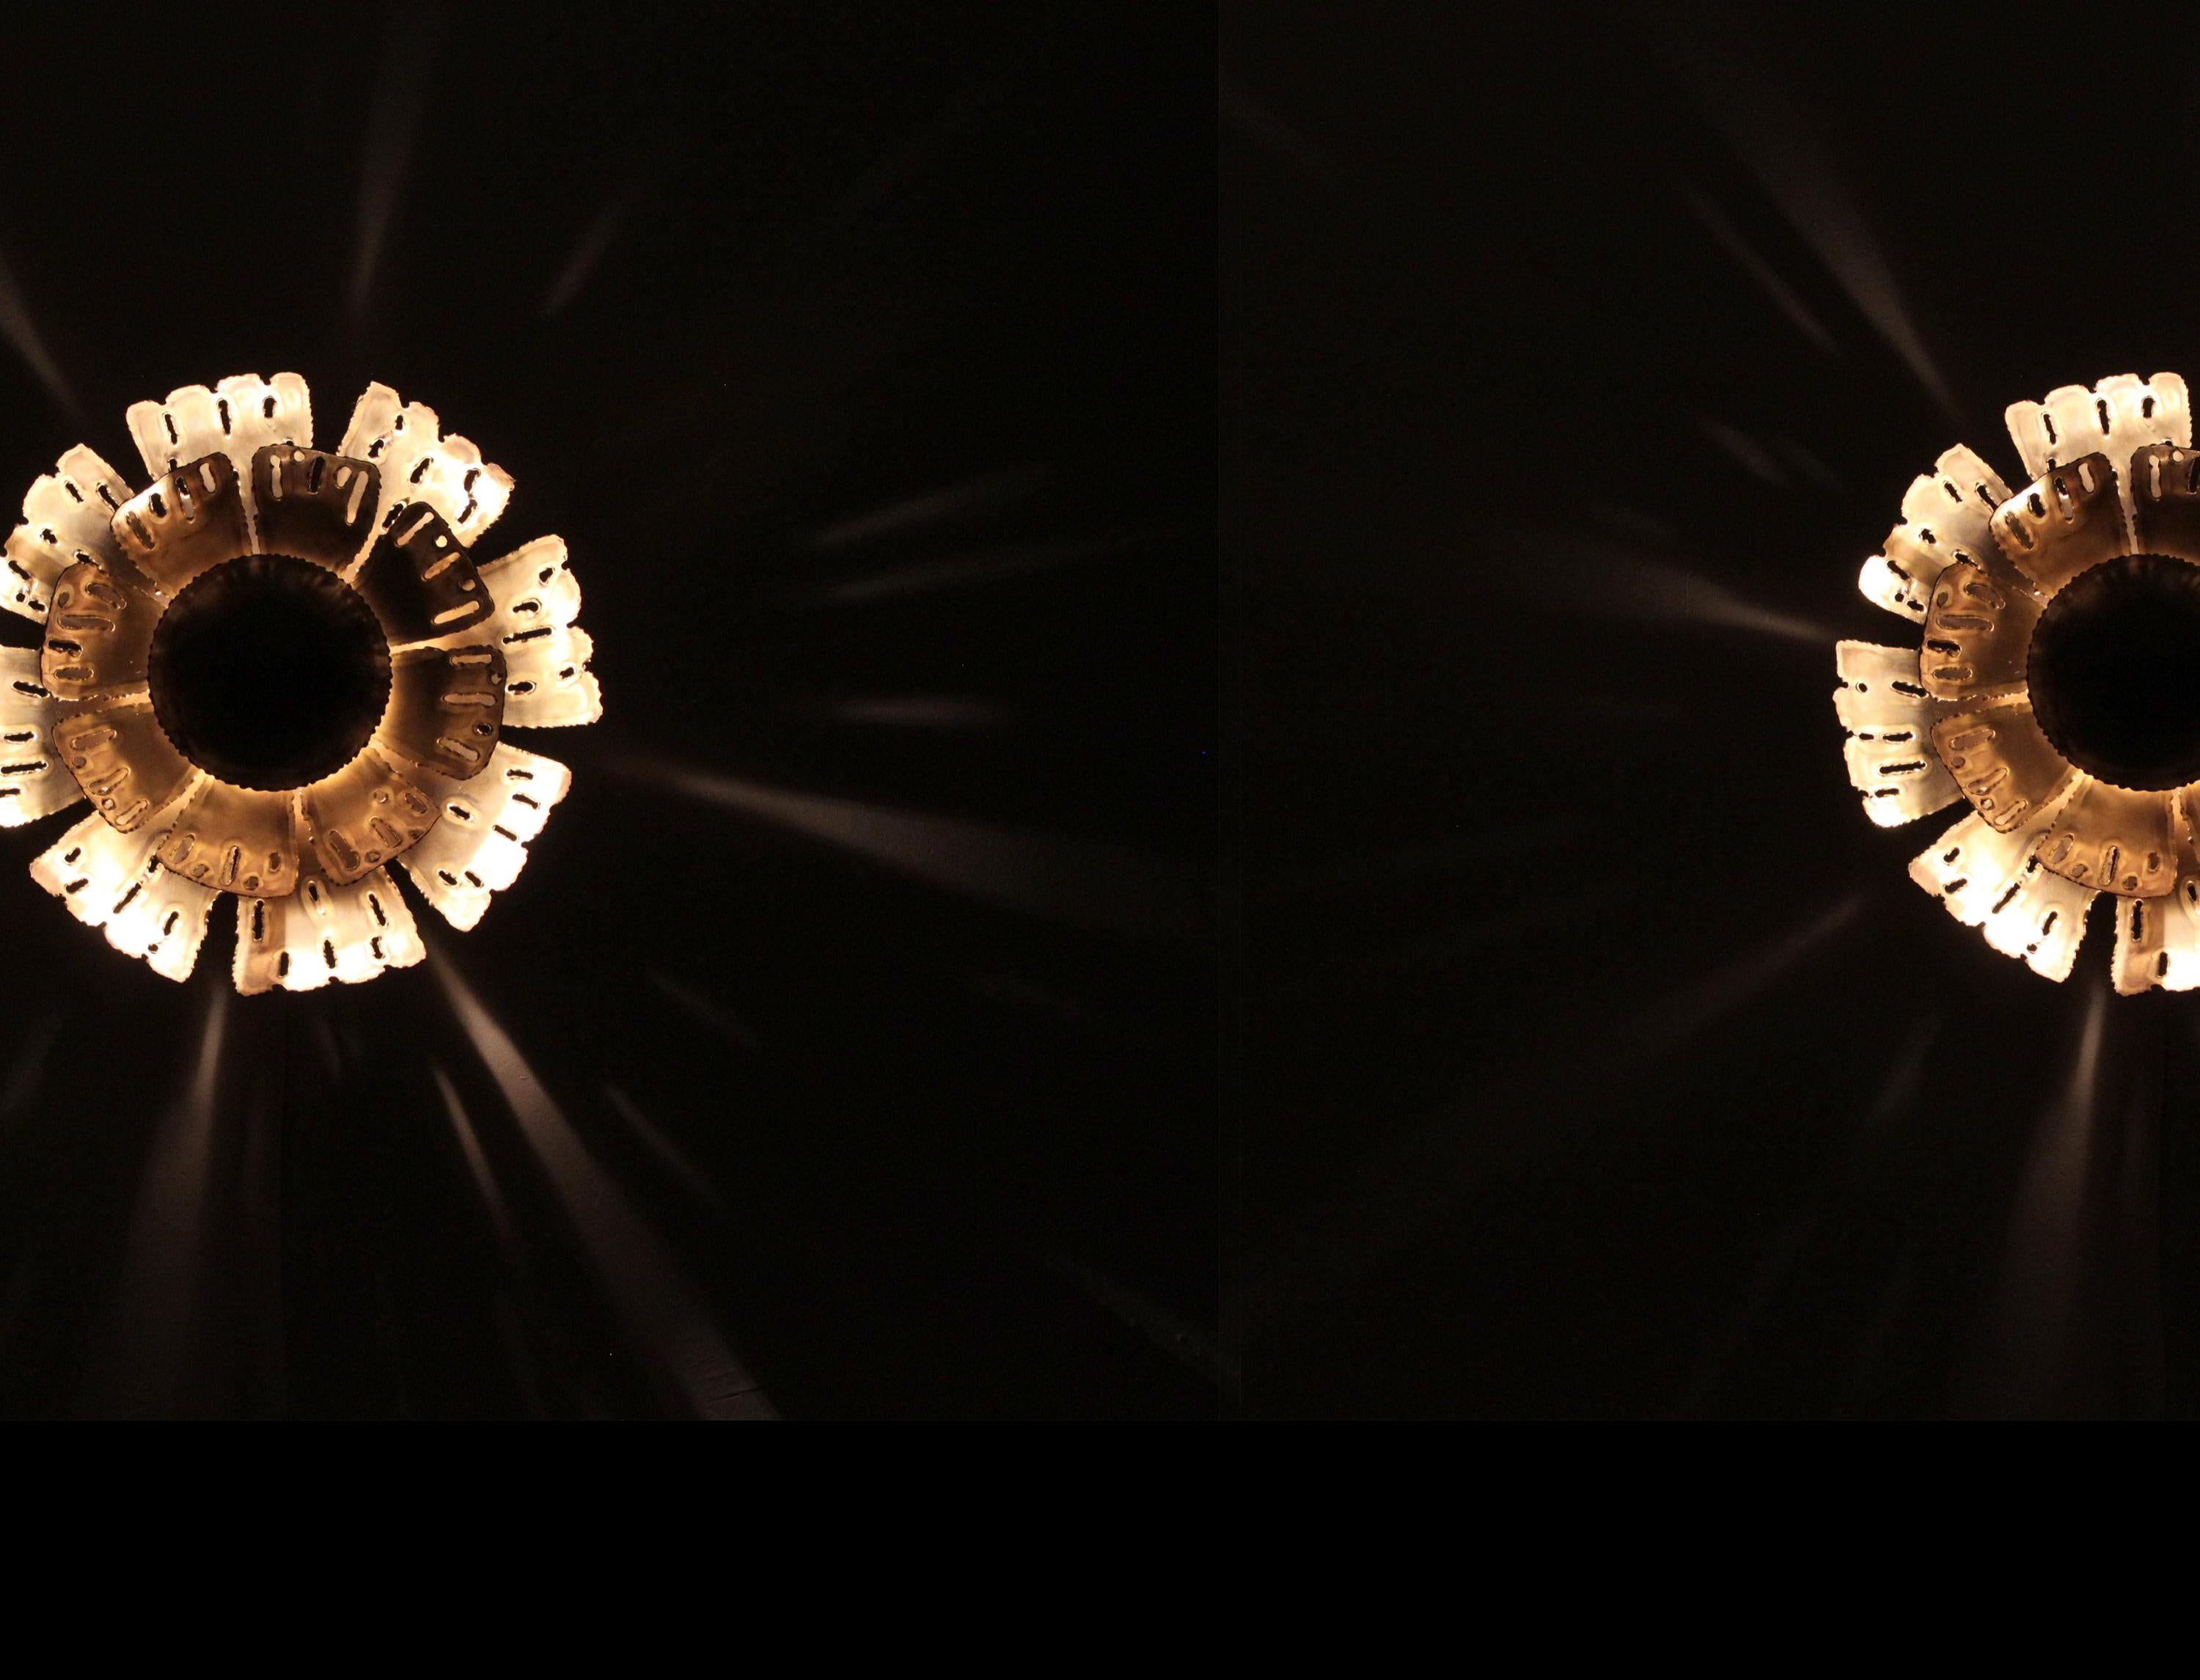 Pair of Large Wall Lights in Brass by Svend Aage Holm Sørensen, Denmark, 1970s For Sale 1